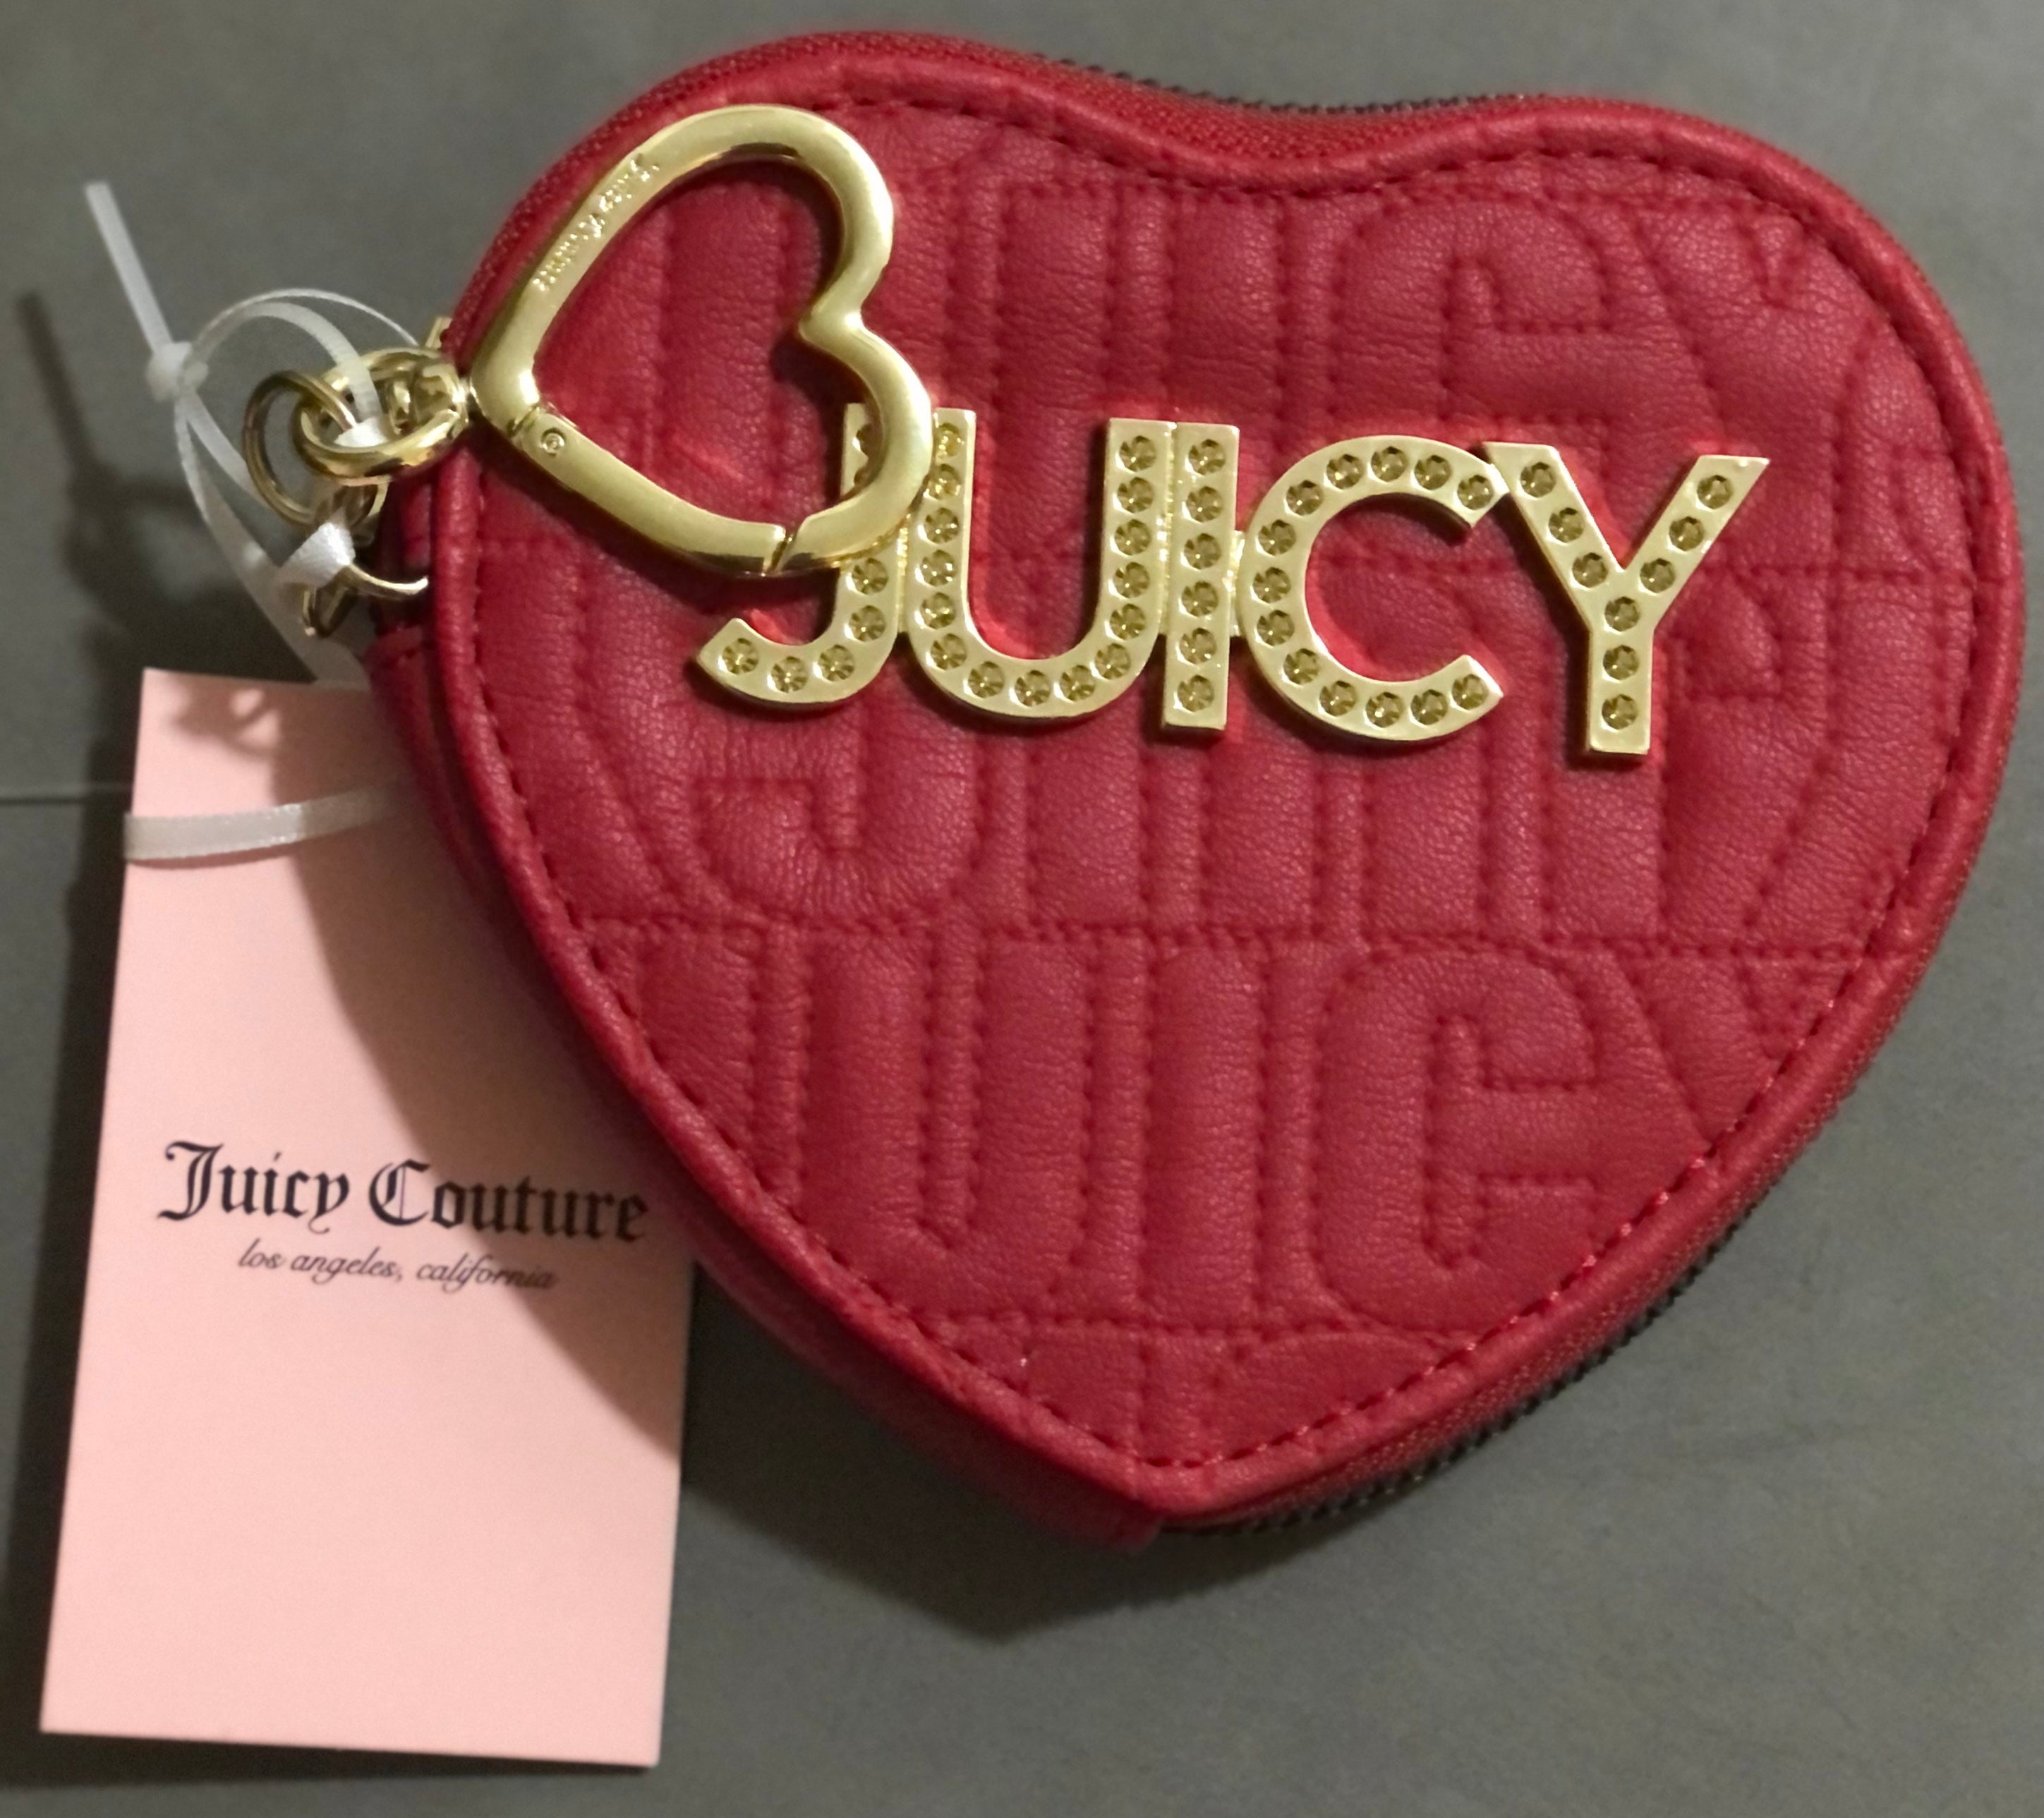 Juicy Couture | Fabric/ Handbag Pink Leather Satchel | Juicy couture  handbags, Juicy couture, Fabric handbags